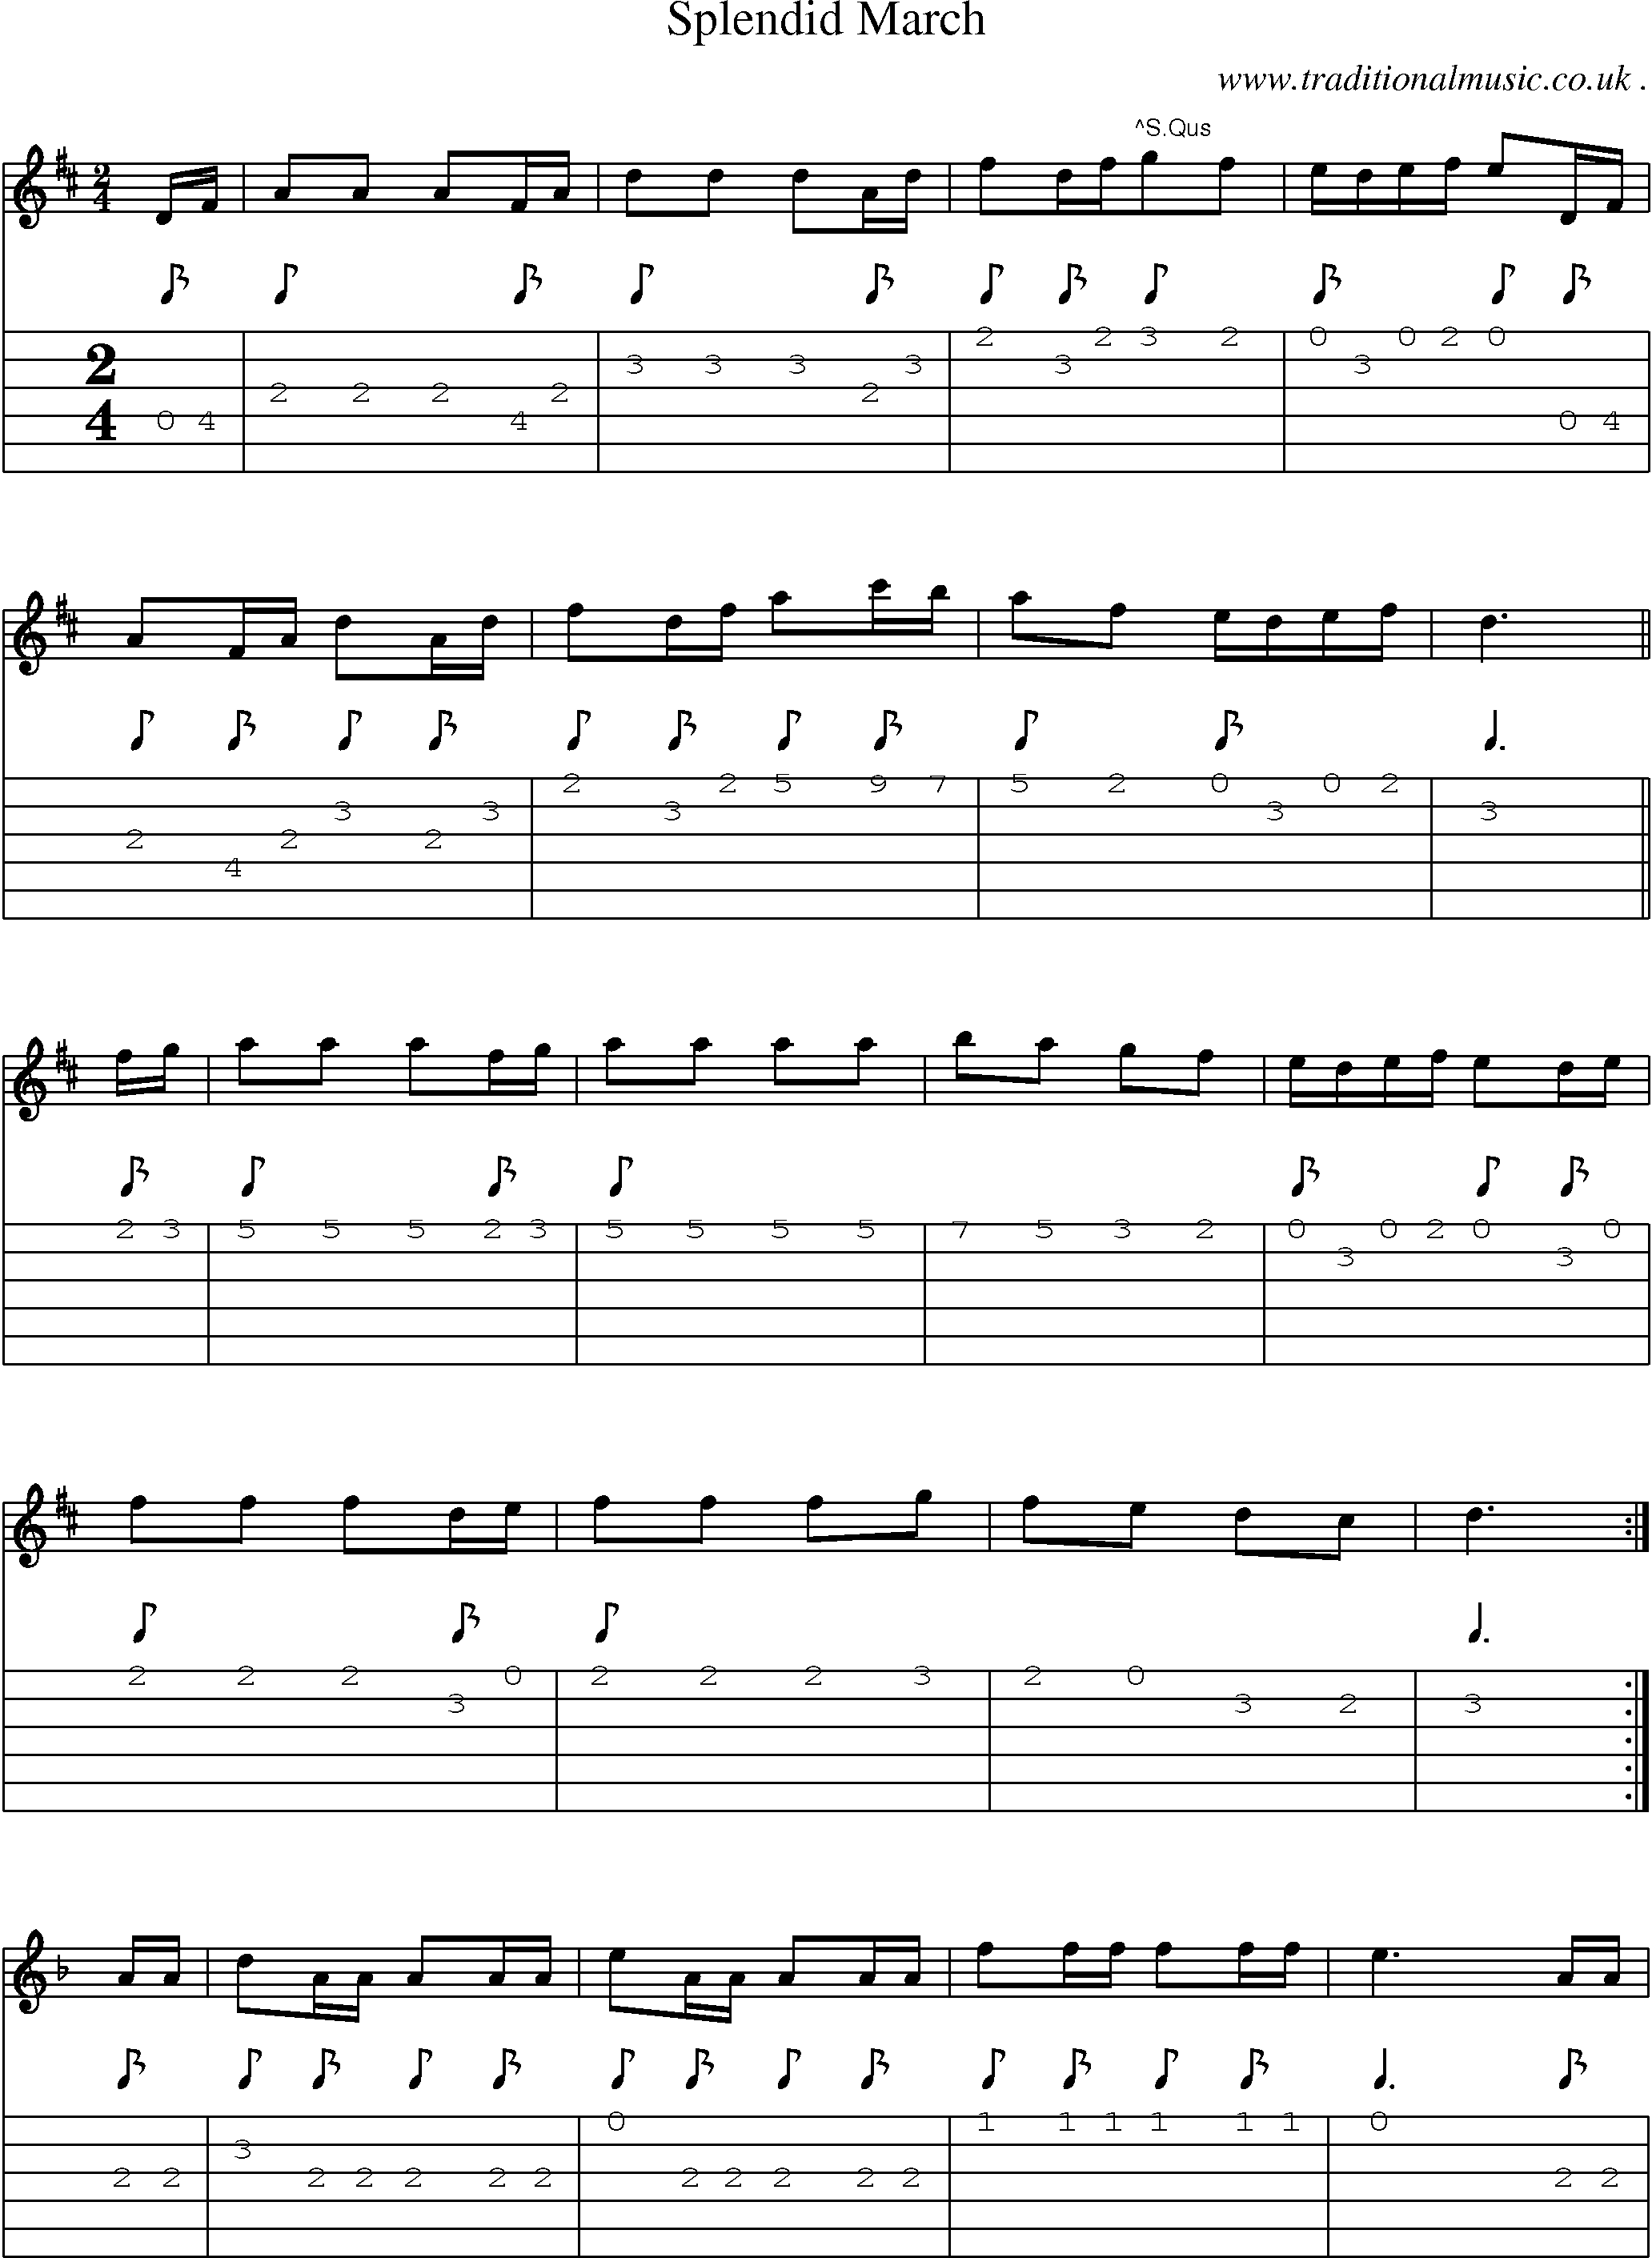 Sheet-Music and Guitar Tabs for Splendid March